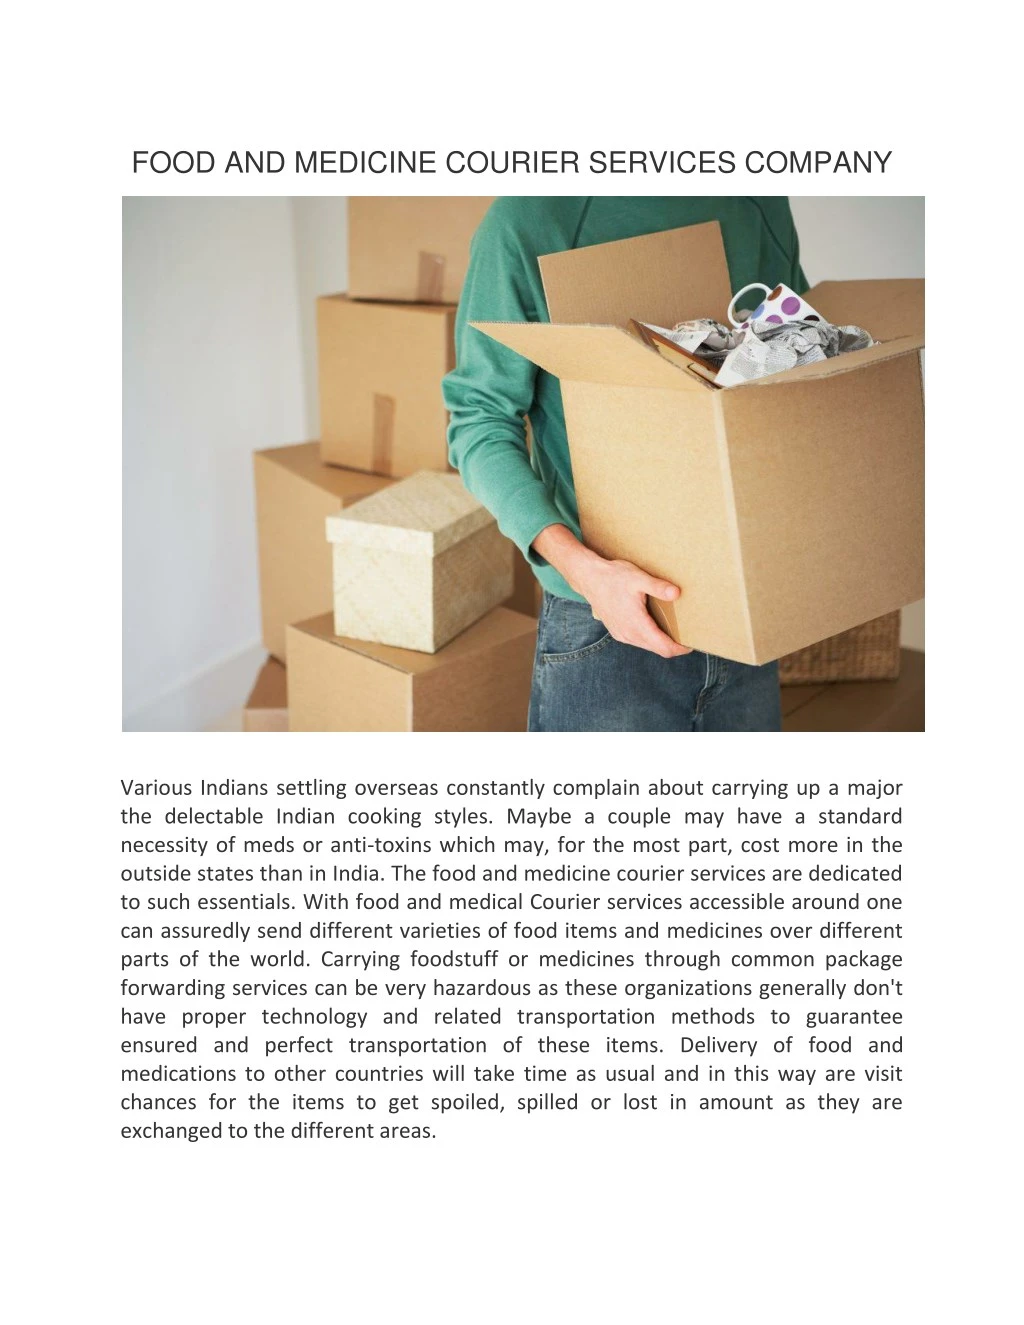 food and medicine courier services company